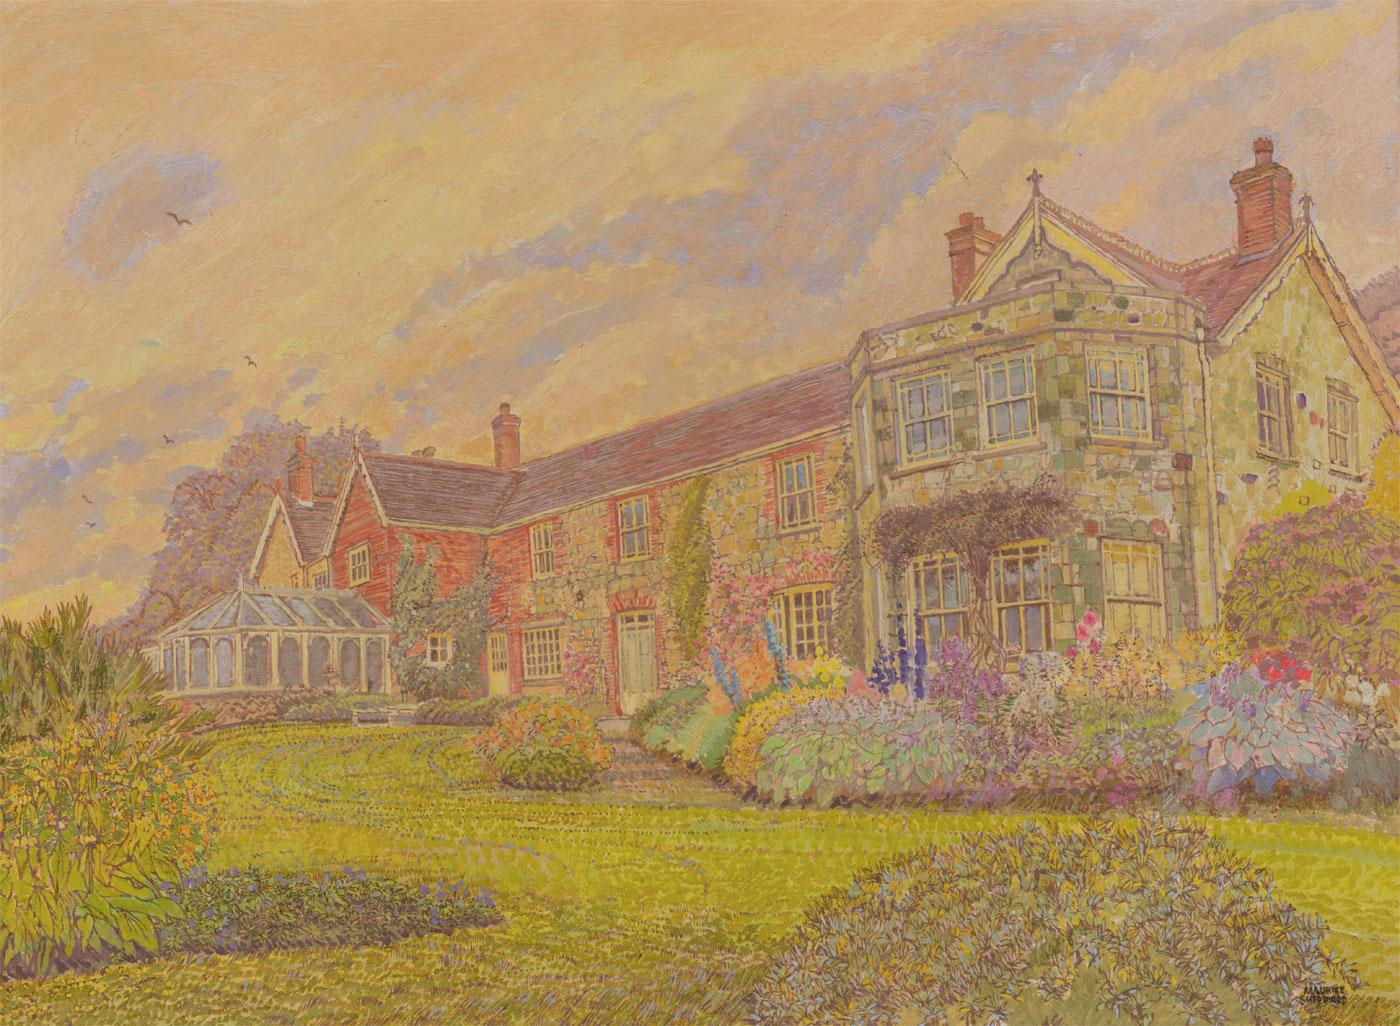 A finely painted and delicate portrayal of a country manor house by listed artist Maurice Sheppard. The picture includes vibrant flowers in the garden using pastel tones and bright colours, alongside minute brush strokes in order to portray the